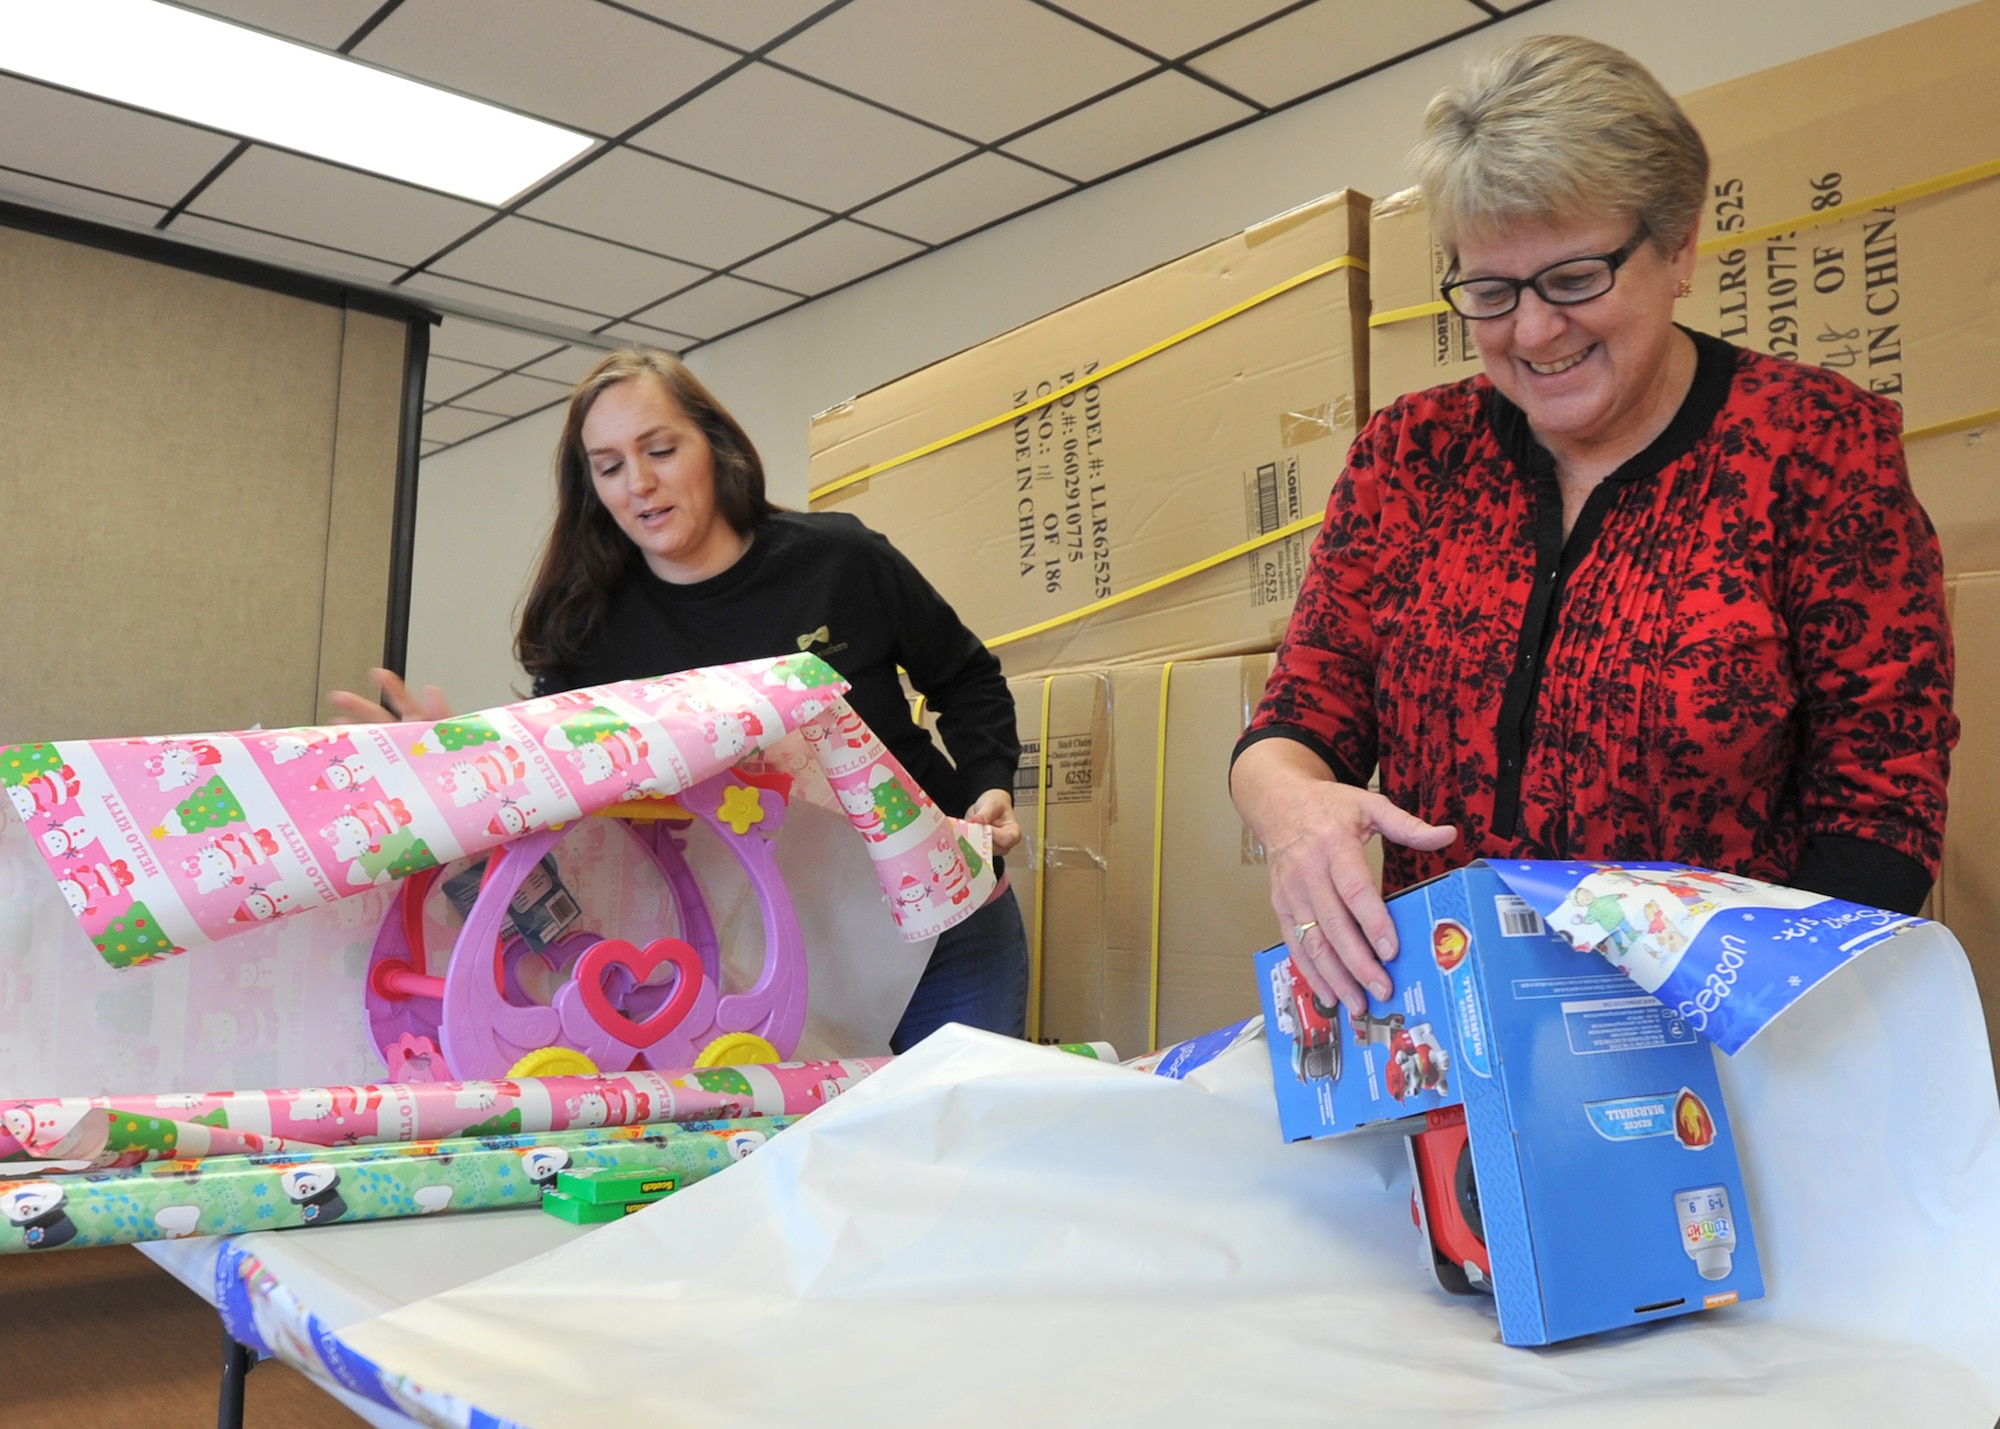 (From left to right) Mandy Dixon, Tyndall Chapel accounting manager, and Lisa Morris, Tyndall Chapel center volunteer, prepare gifts during Operation Angel Tree at the Tyndall Air Force Base Chapel Dec. 16, 2016. This event is one of several hosted by multiple Tyndall community organizations every year during the holiday season. Each of these events are focused on embracing camaraderie within the community. (U.S. Air Force photo by Senior Airman Ty-Rico Lea/Released)